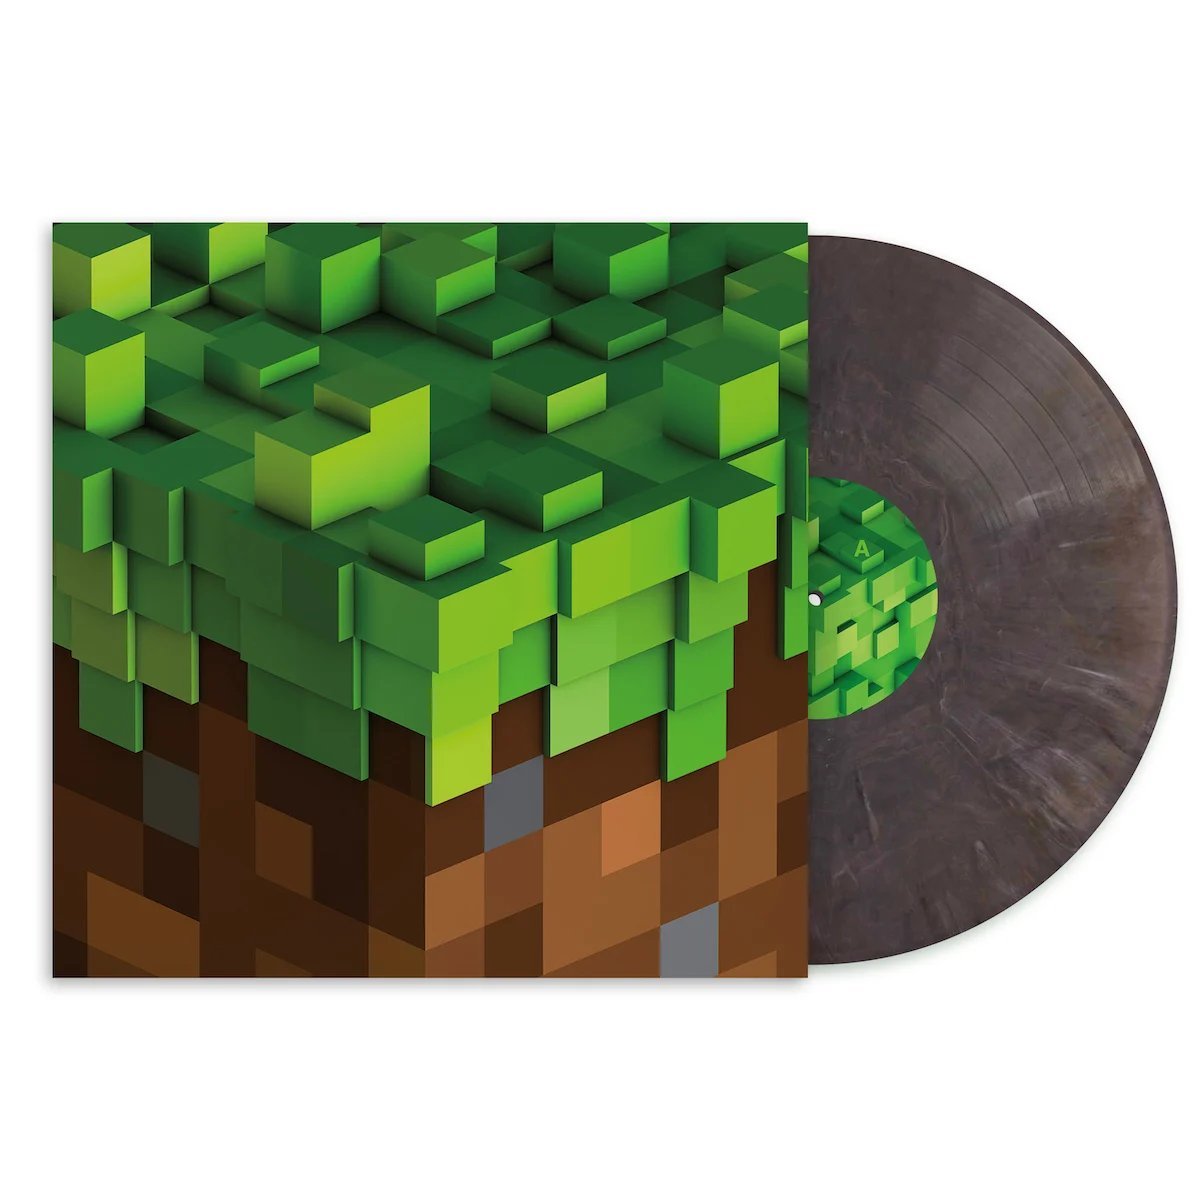 WIN! - A Vinyl Copy of C418’s ‘Minecraft Volume Alpha’ Our limited-edition UK exclusive of @C418’s first Minecraft score release drops next Friday through @ghostly To be entered into our giveaway, simply like, share, and give us a follow ⛏️ normanrecords.com/records/154203…